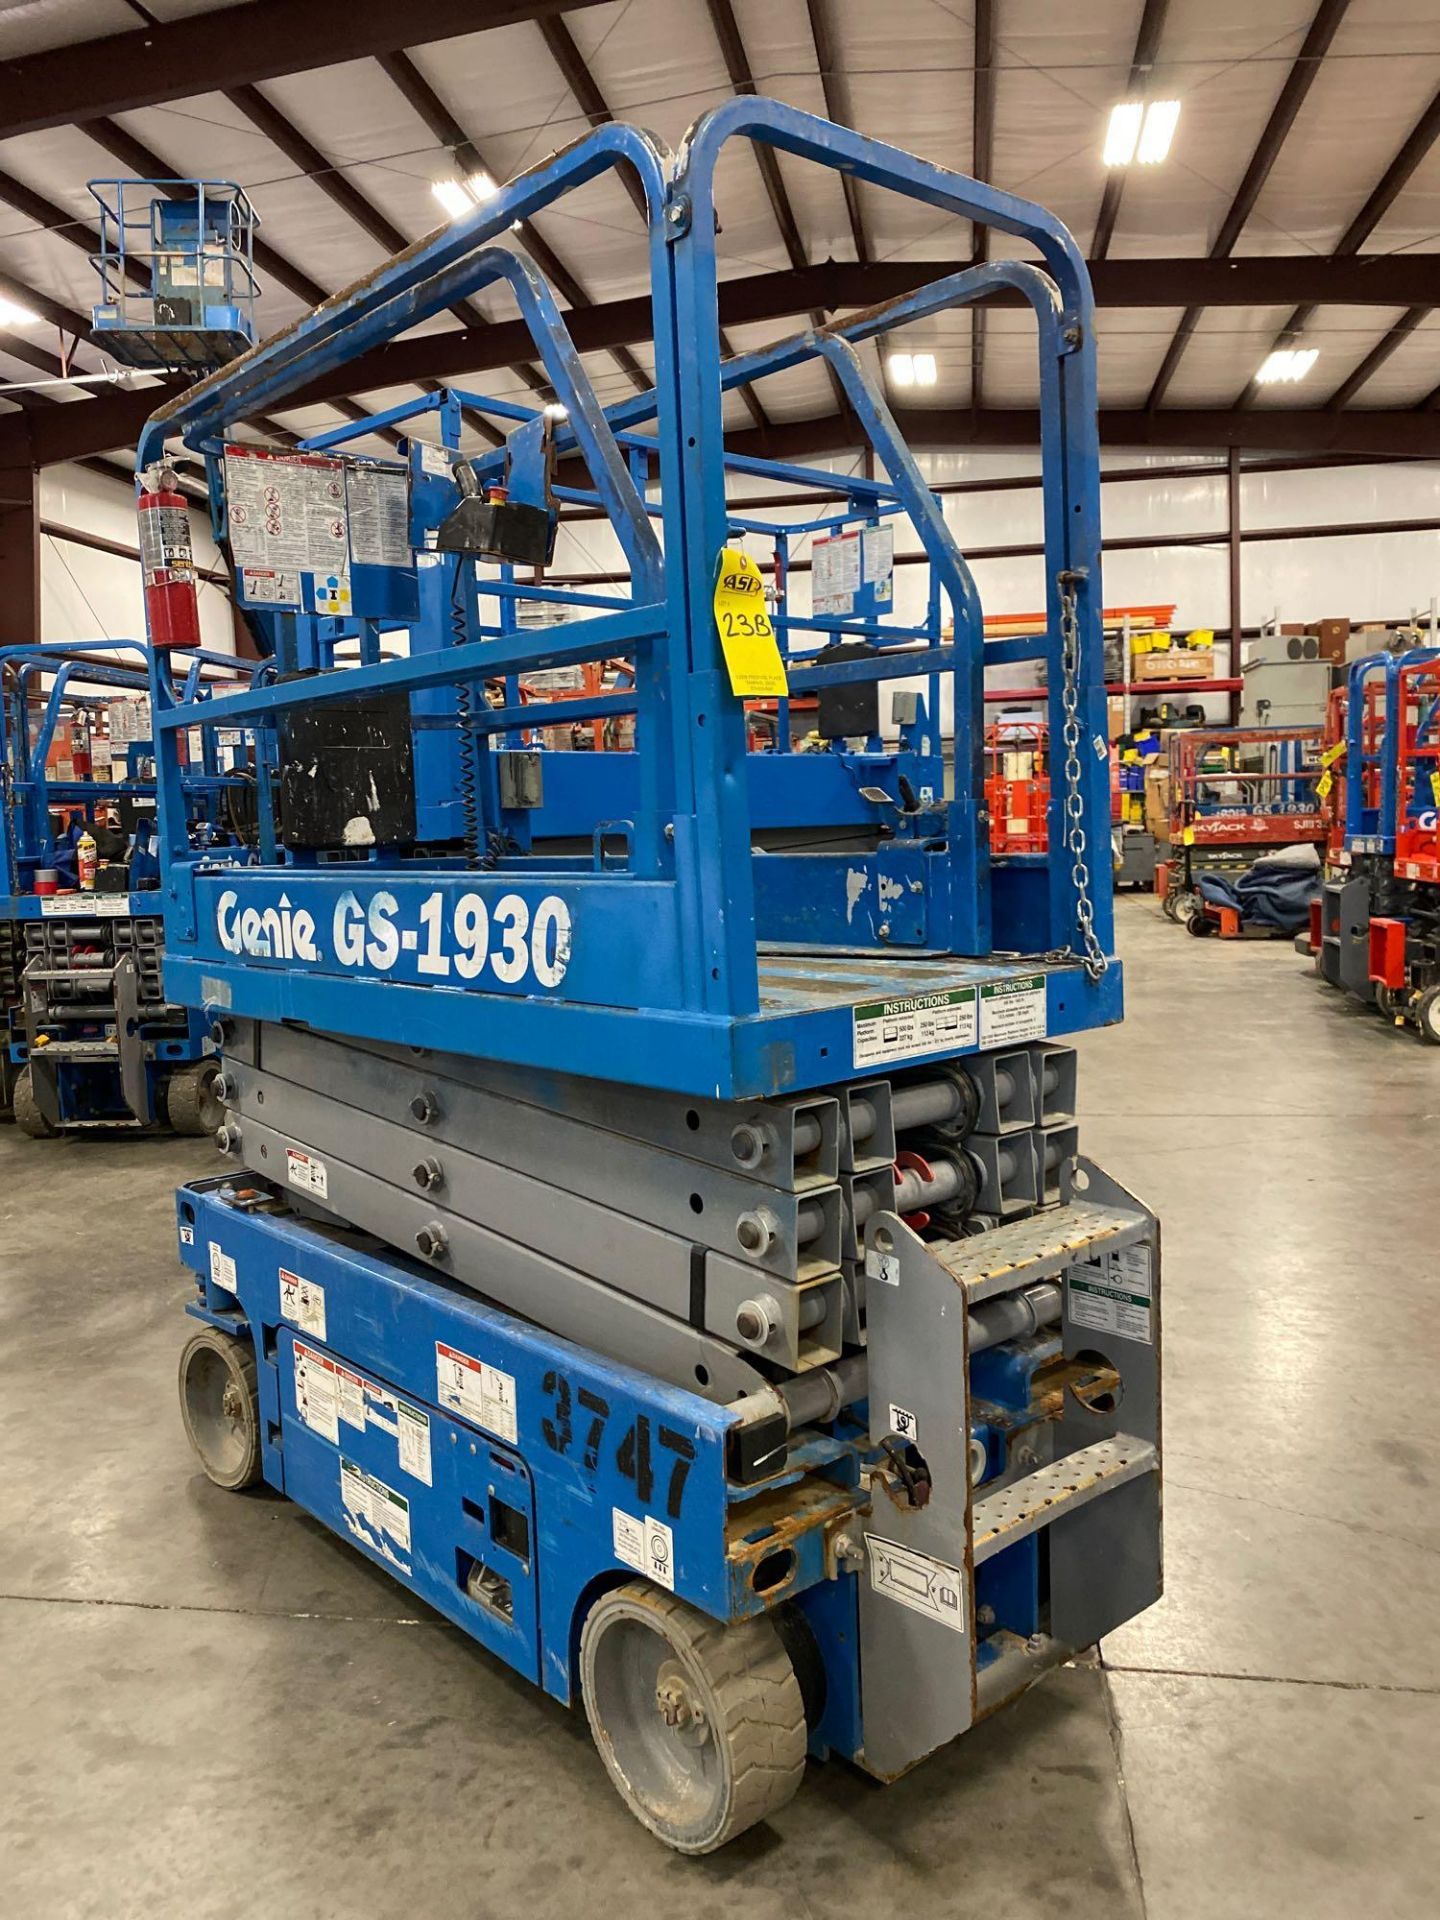 2017 GENIE GS1930 SCISSOR LIFT, SELF PROPELLED, 19' PLATFORM HEIGHT, BUILT IN BATTERY CHARGER, SLIDE - Image 2 of 6